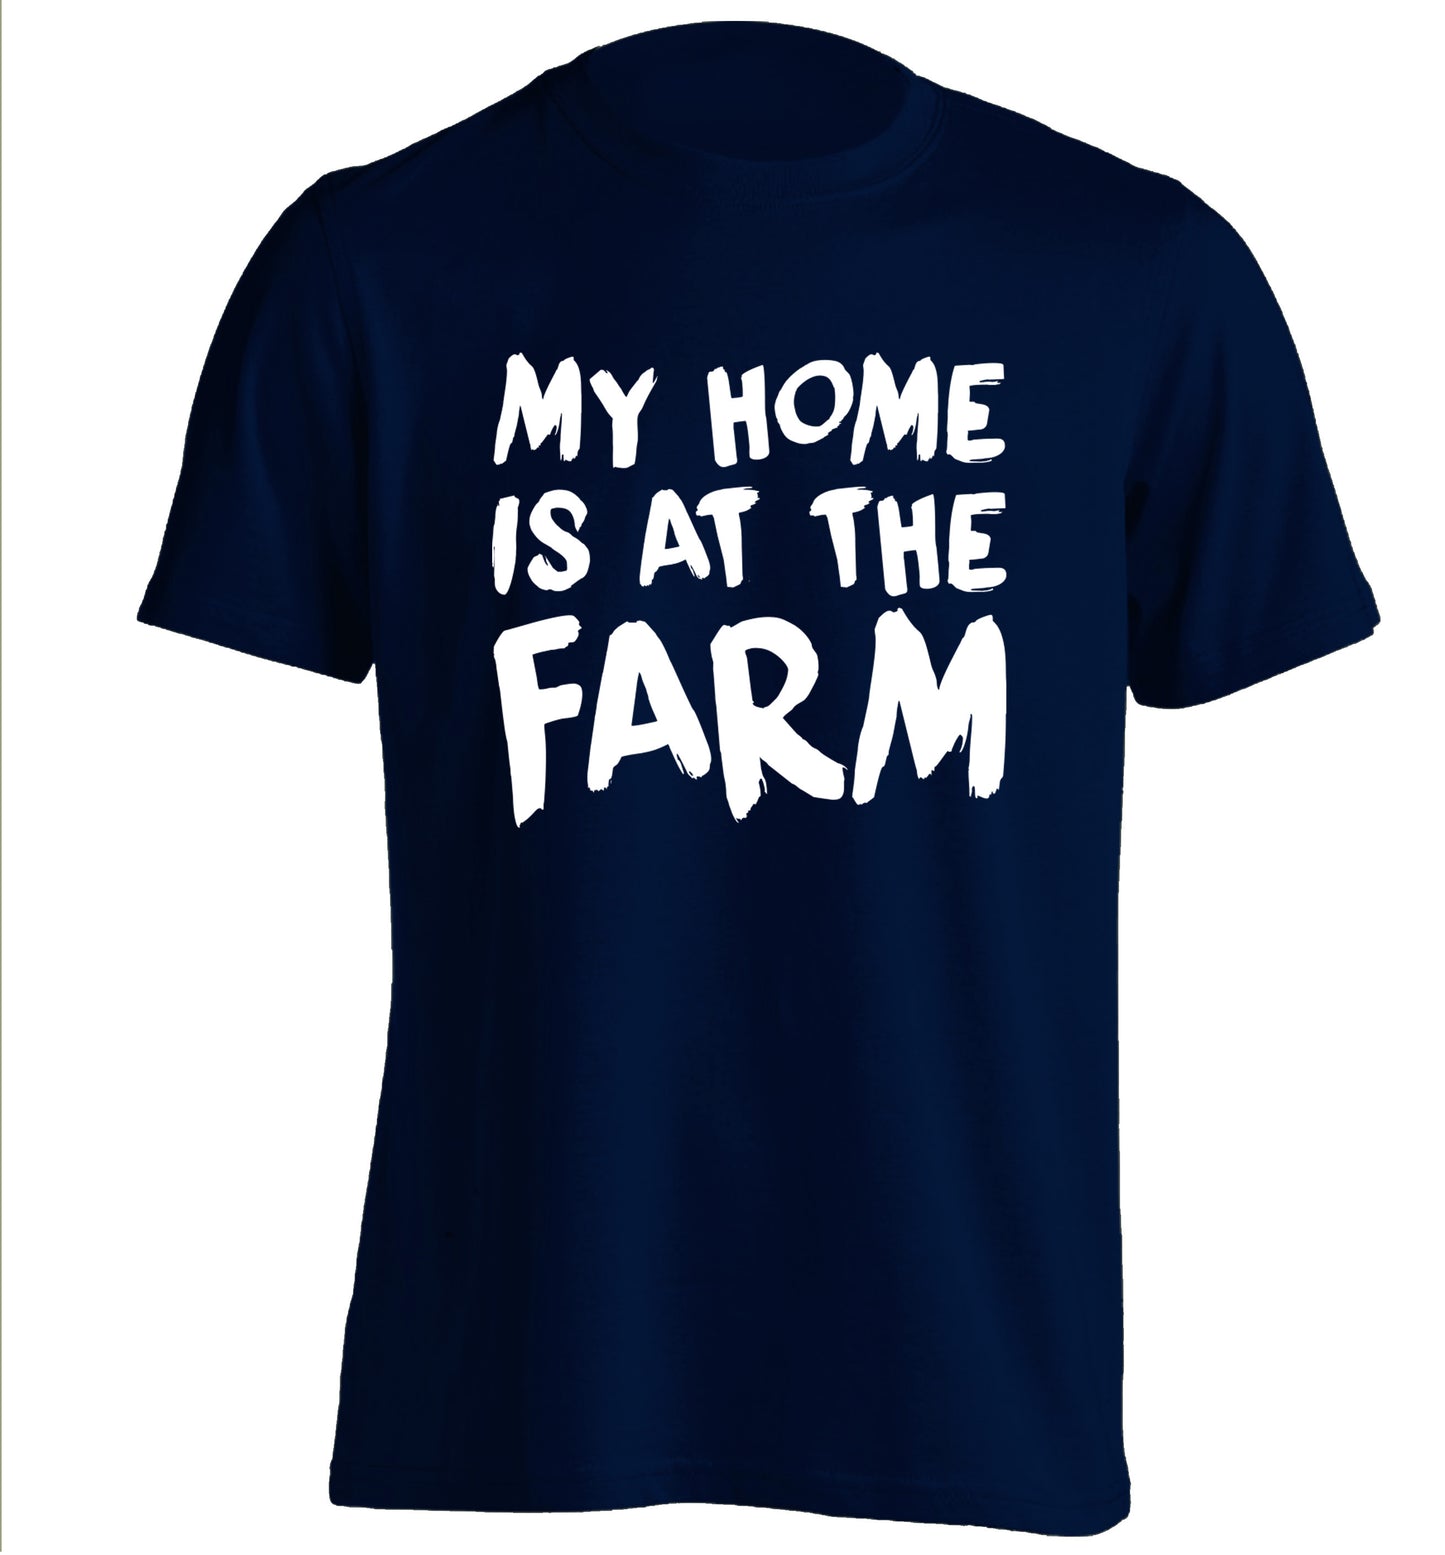 My home is at the farm adults unisex navy Tshirt 2XL